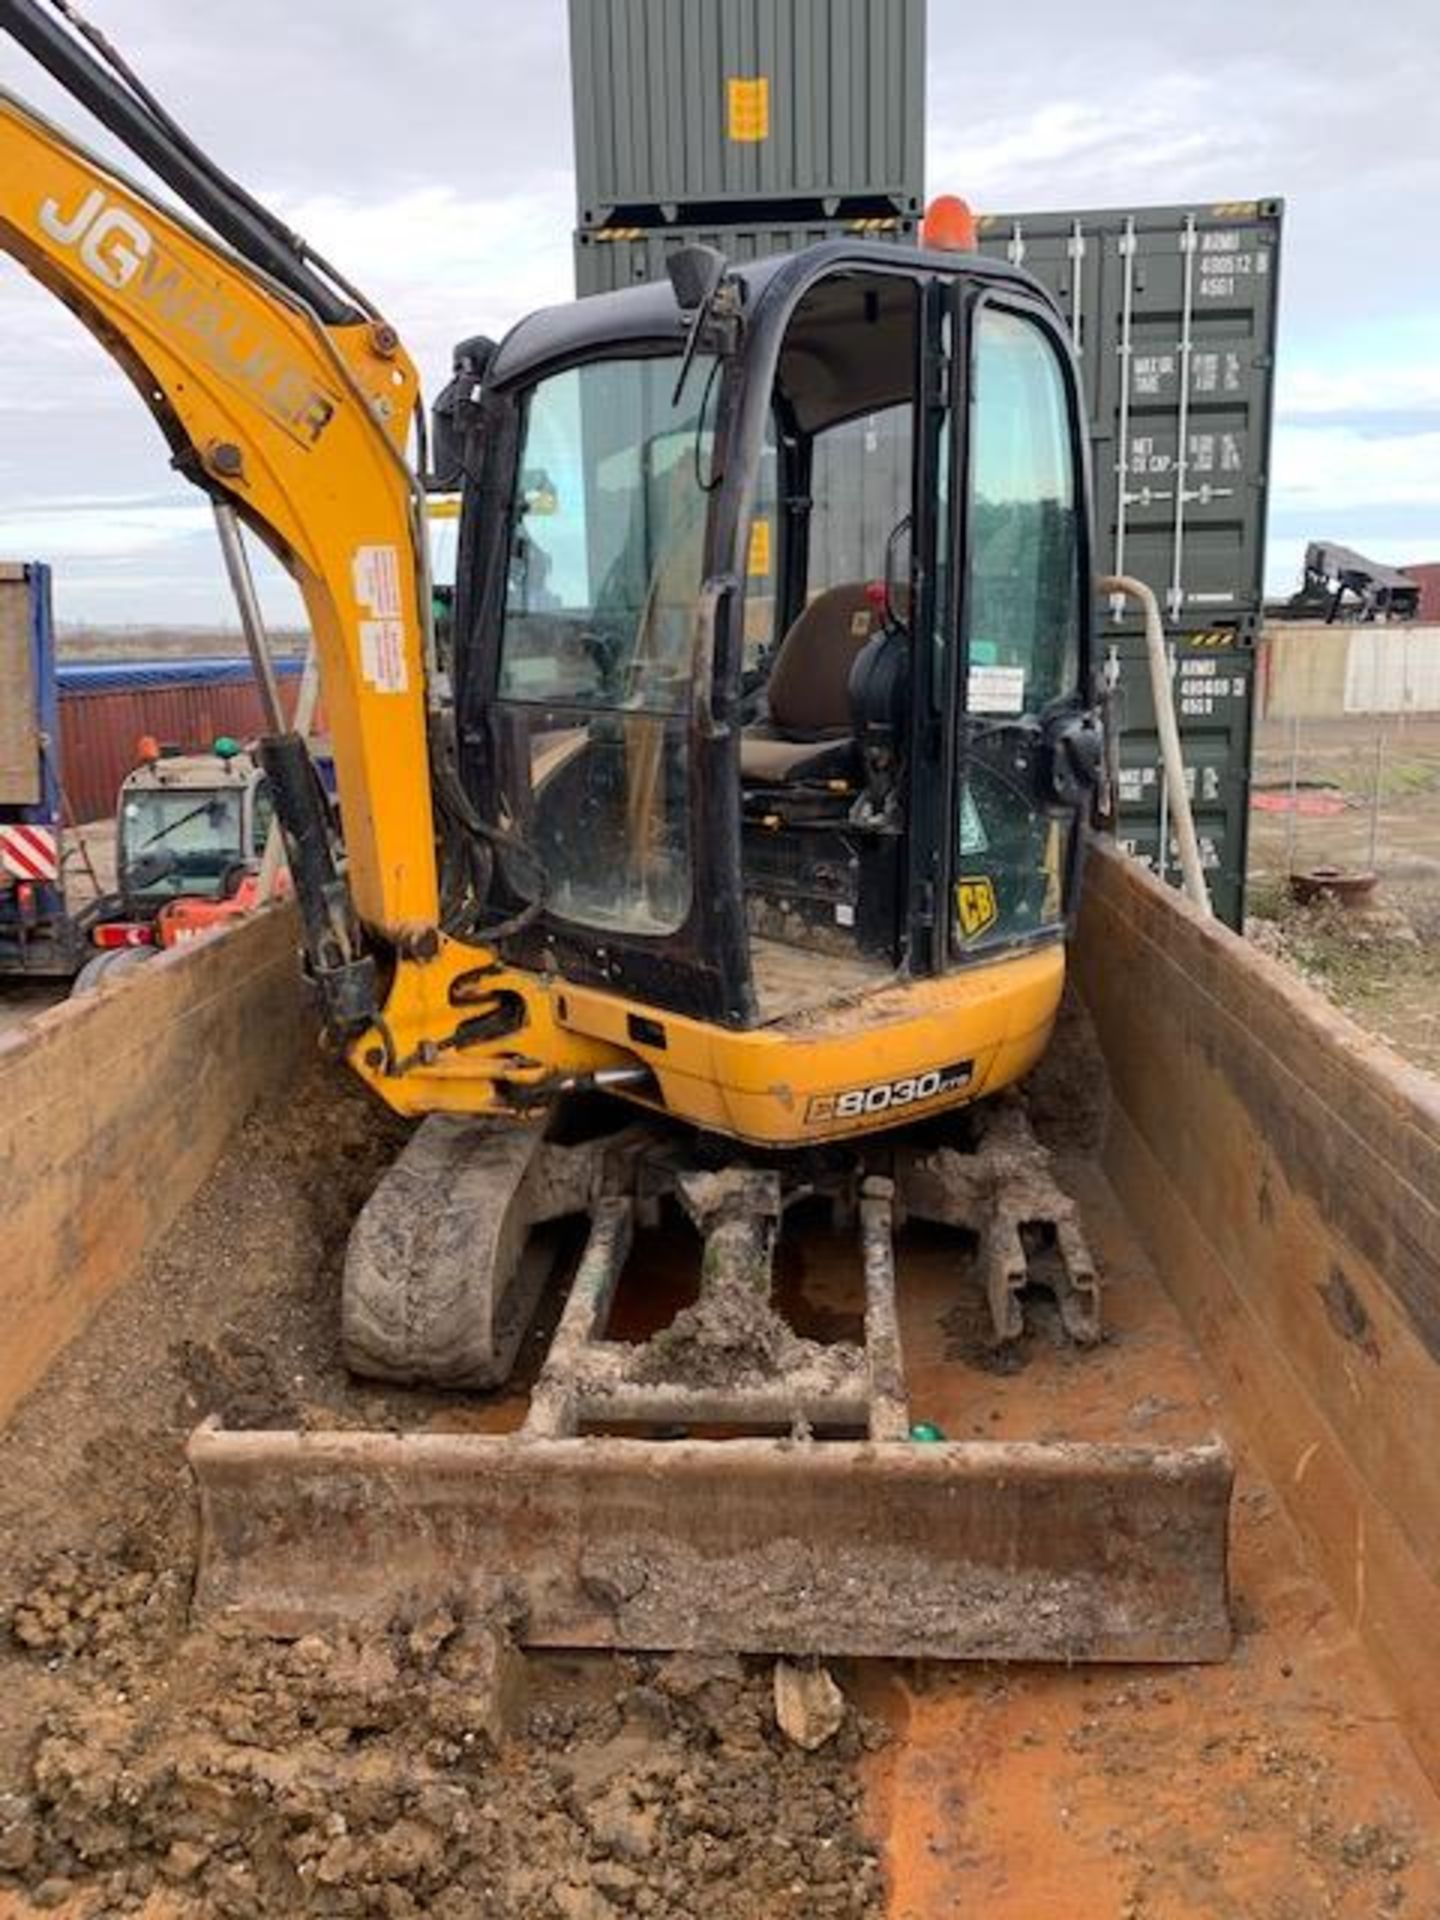 JCB 3 tonne tracked excavatorSerial No. JCB08030E02021469 (2012)TBC recorded hourspiped for - Image 4 of 8